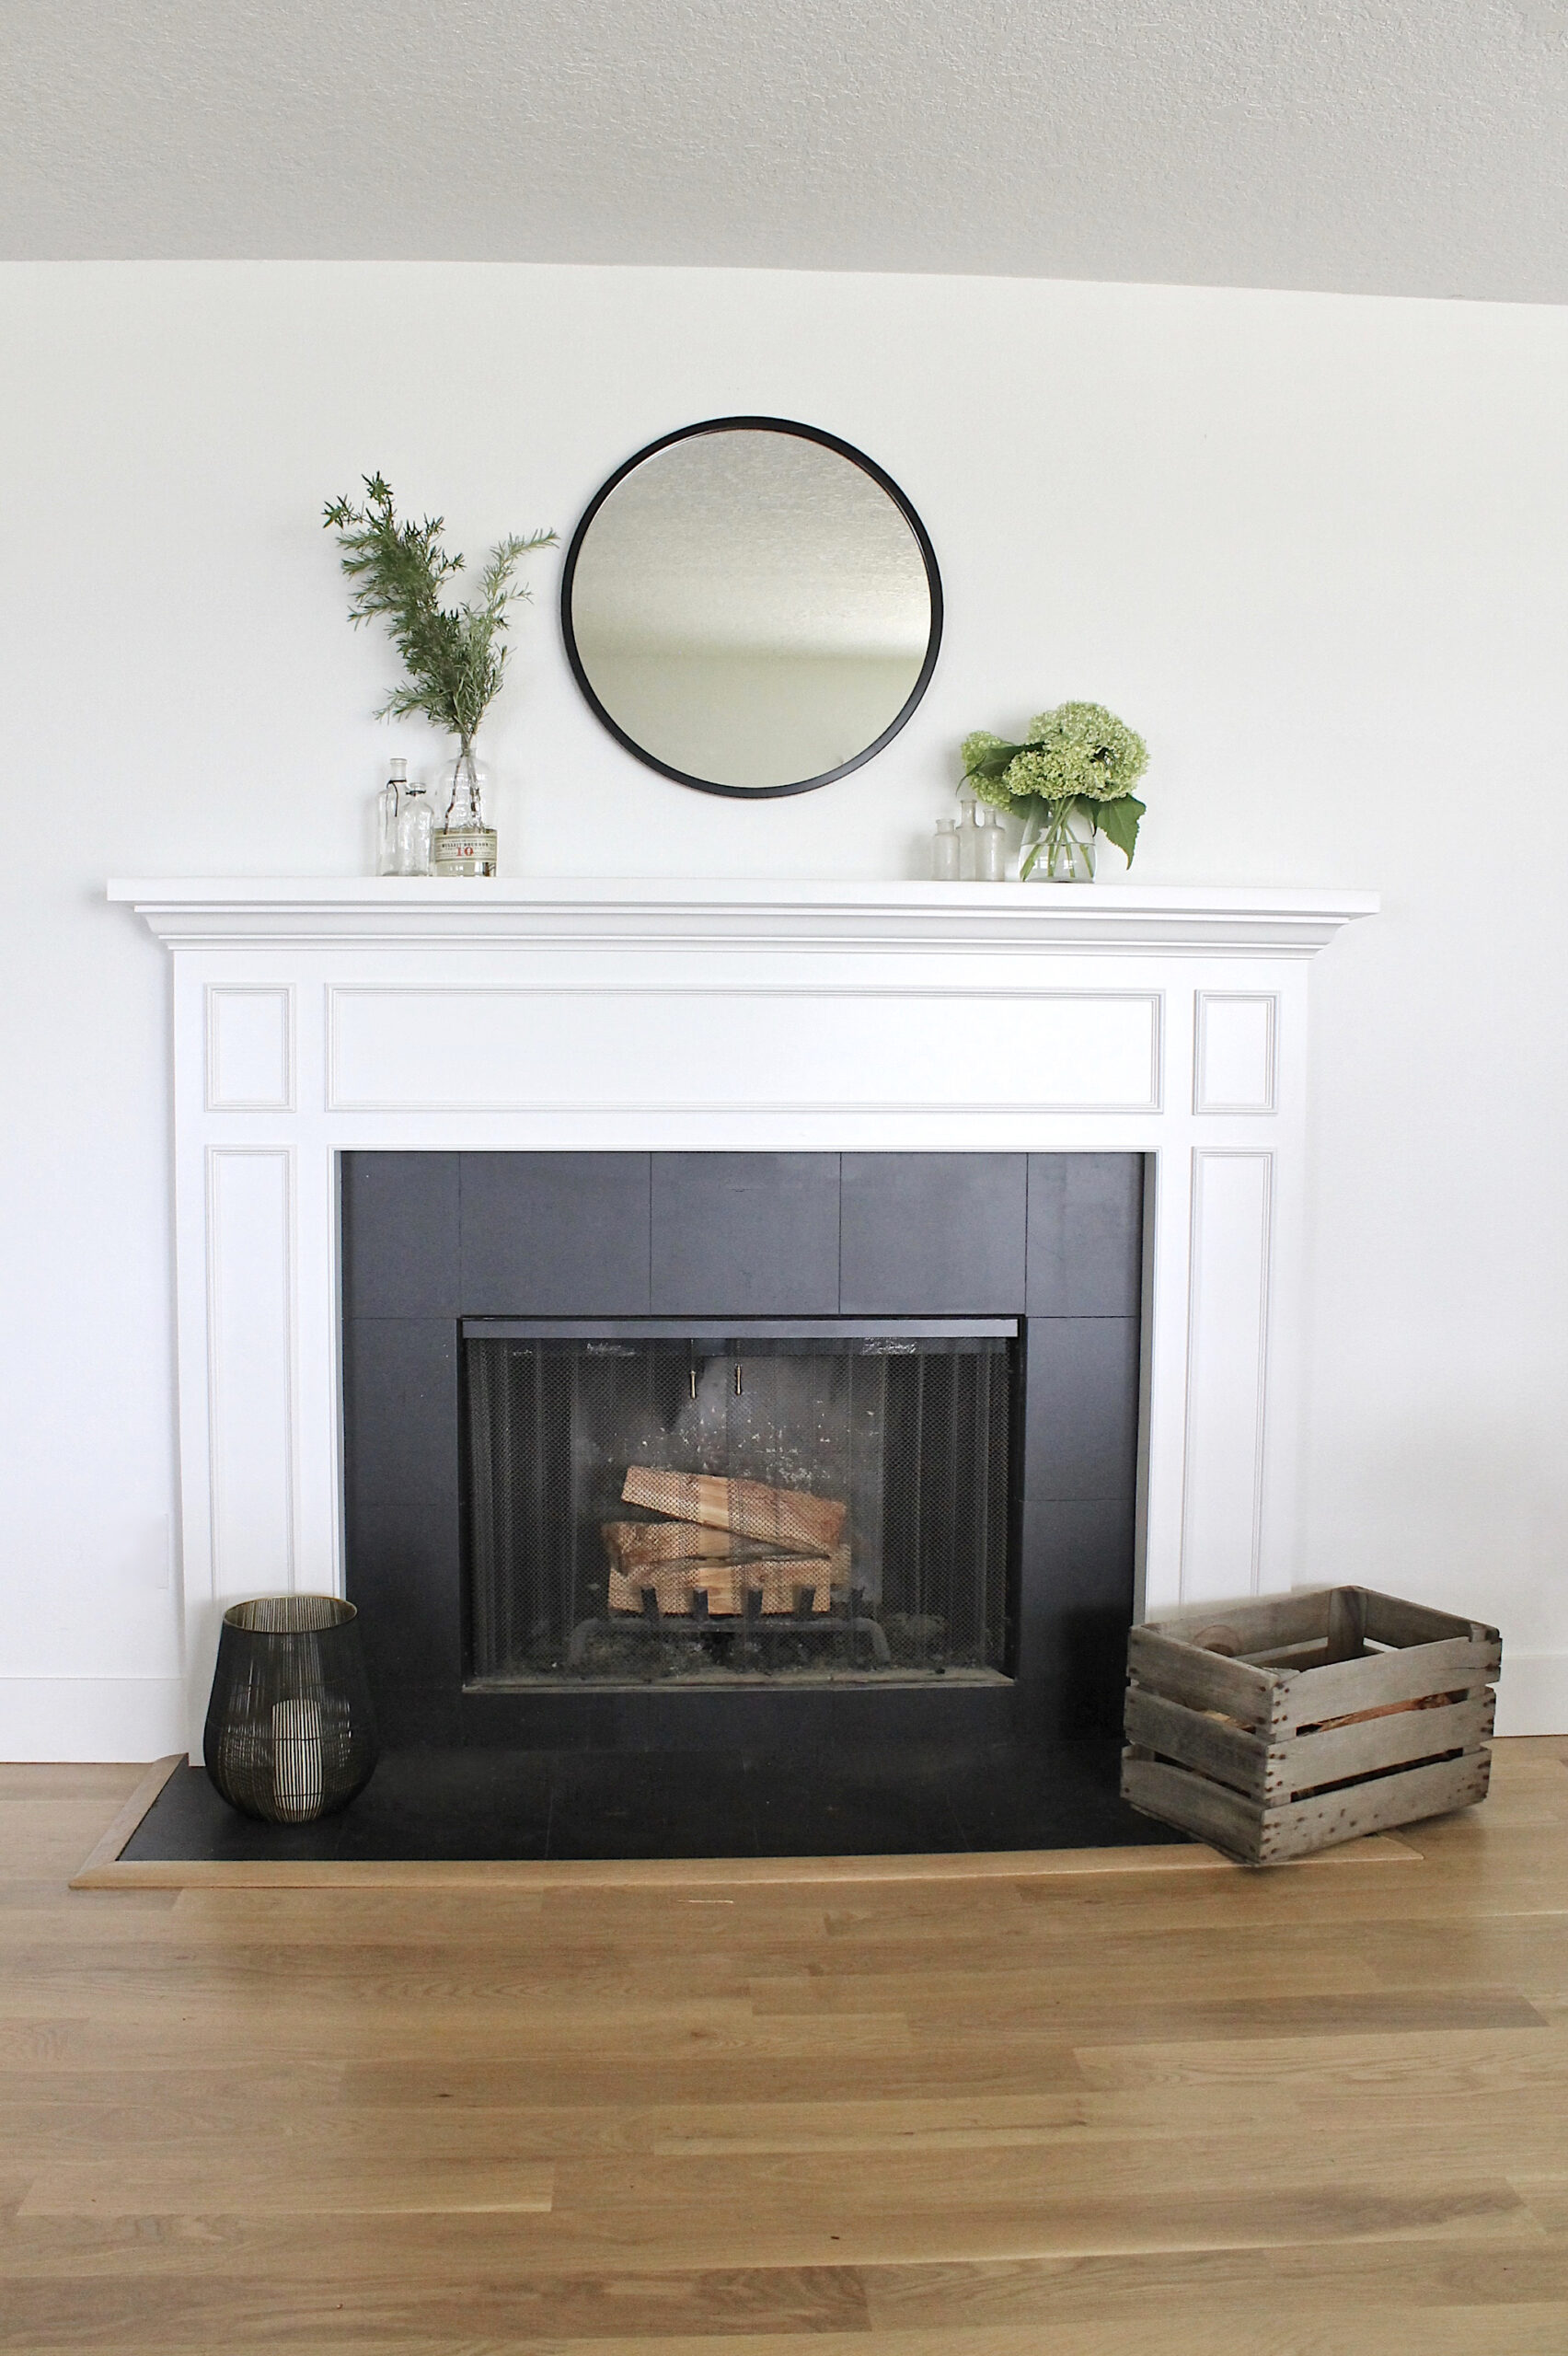 How To Paint A Ceramic Tile Fireplace, Do You Have To Put Tile Around A Fireplace